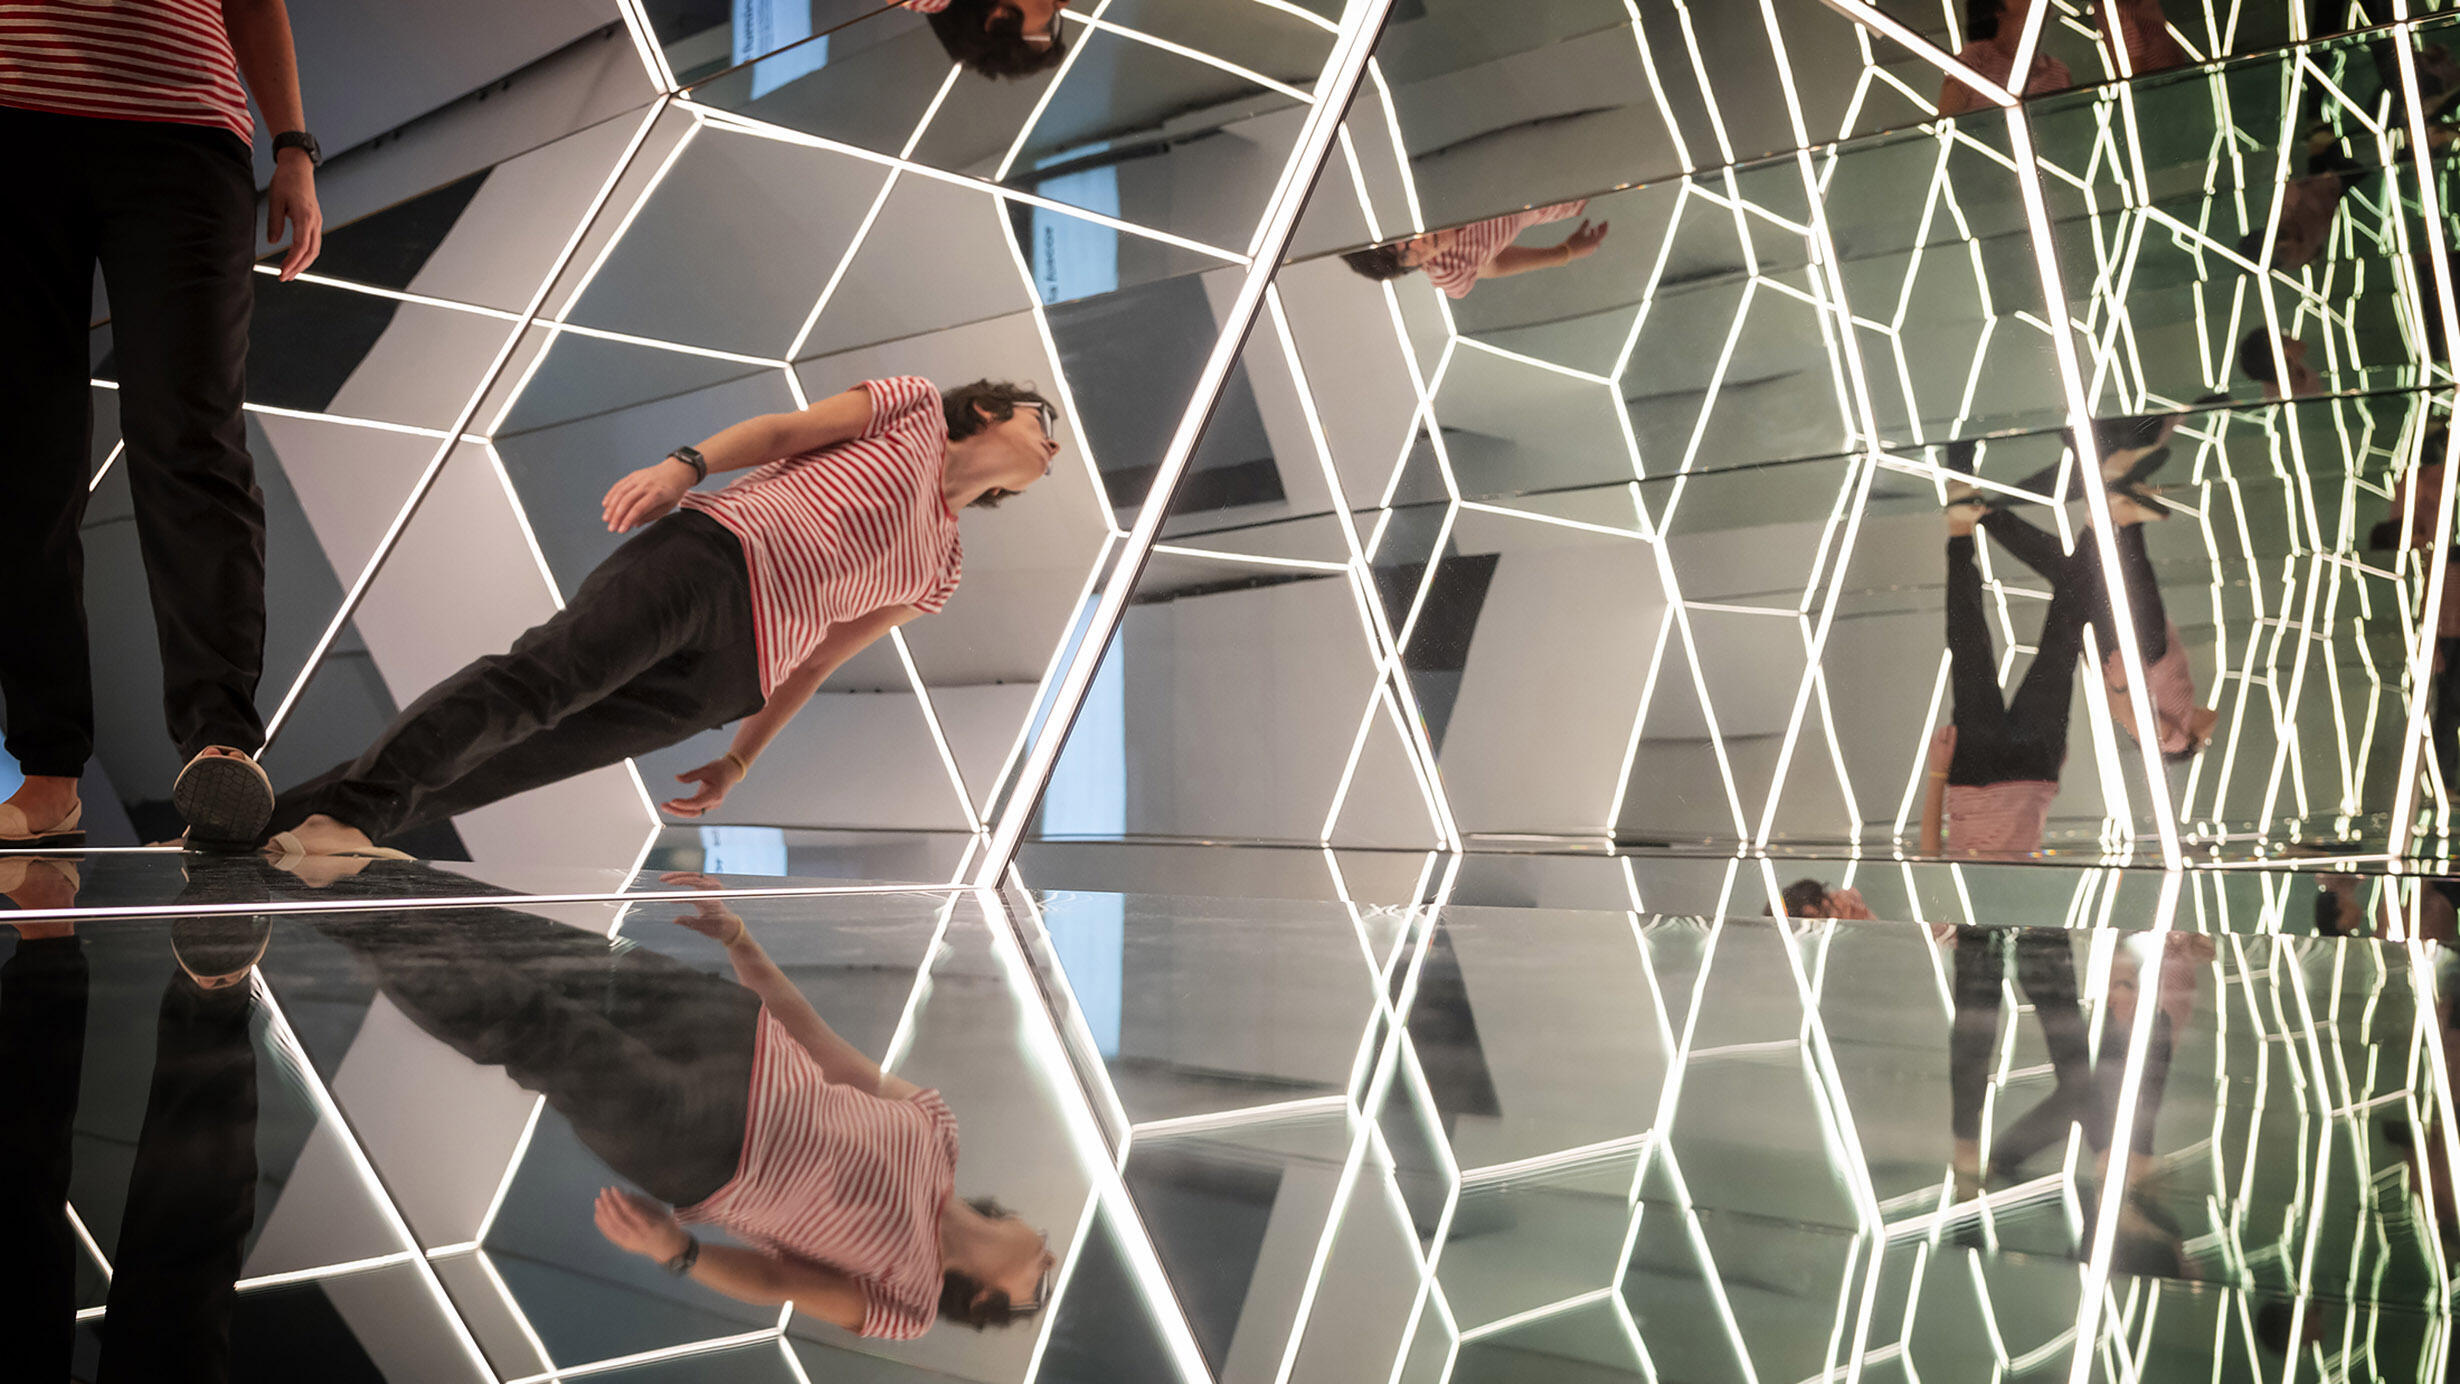  A person stands in a room lined with differently-shaped mirrors and views multiple reflections of themself.